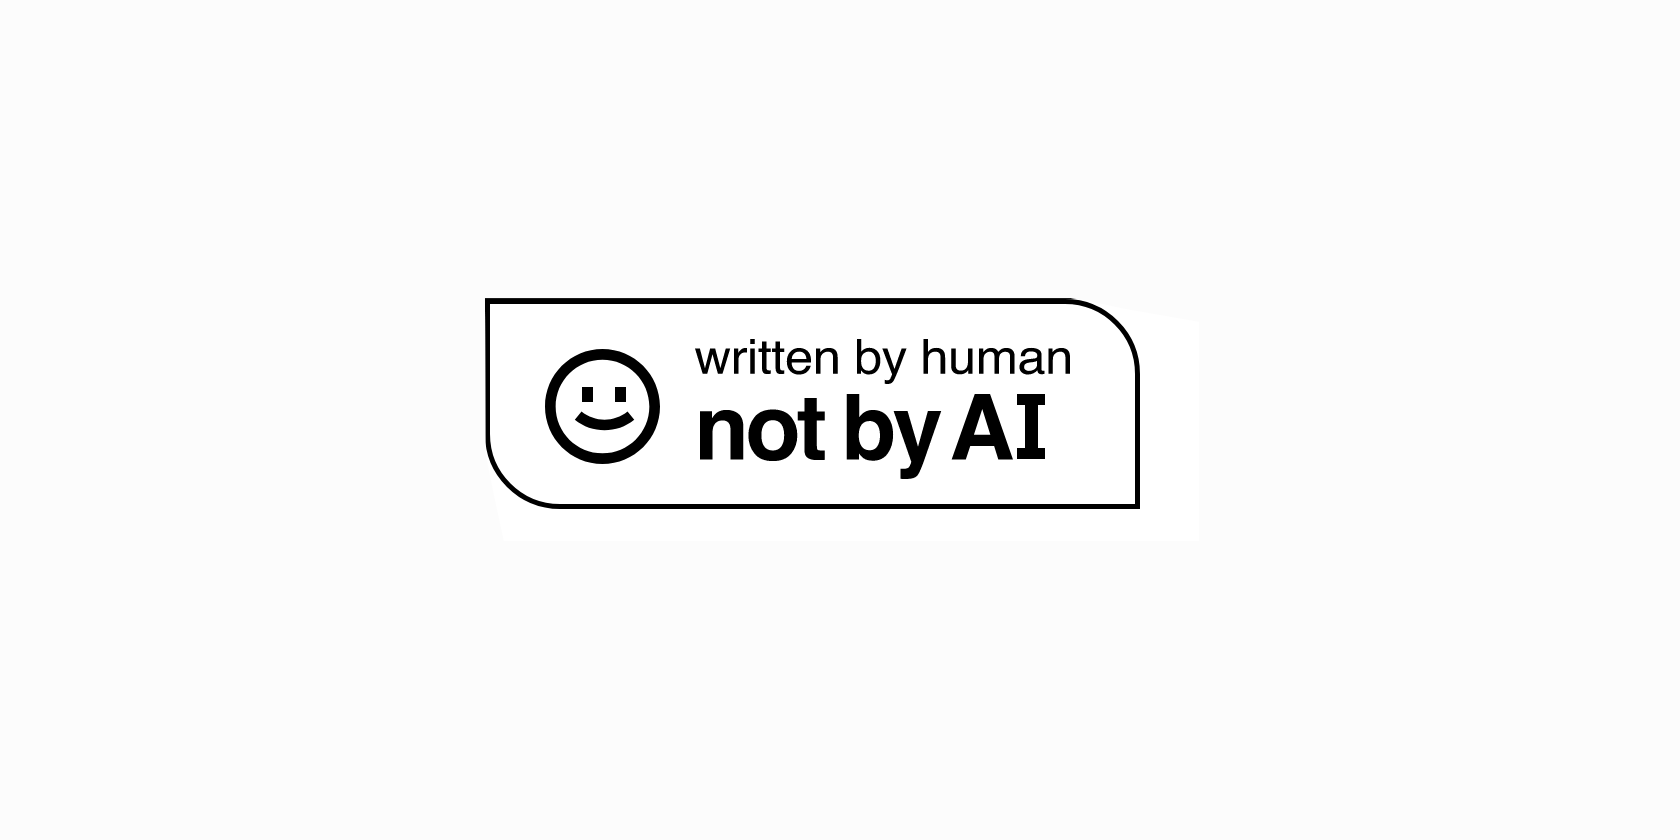 A black and white logo with the text written by human not by AI. There is a simple smiley face to the left